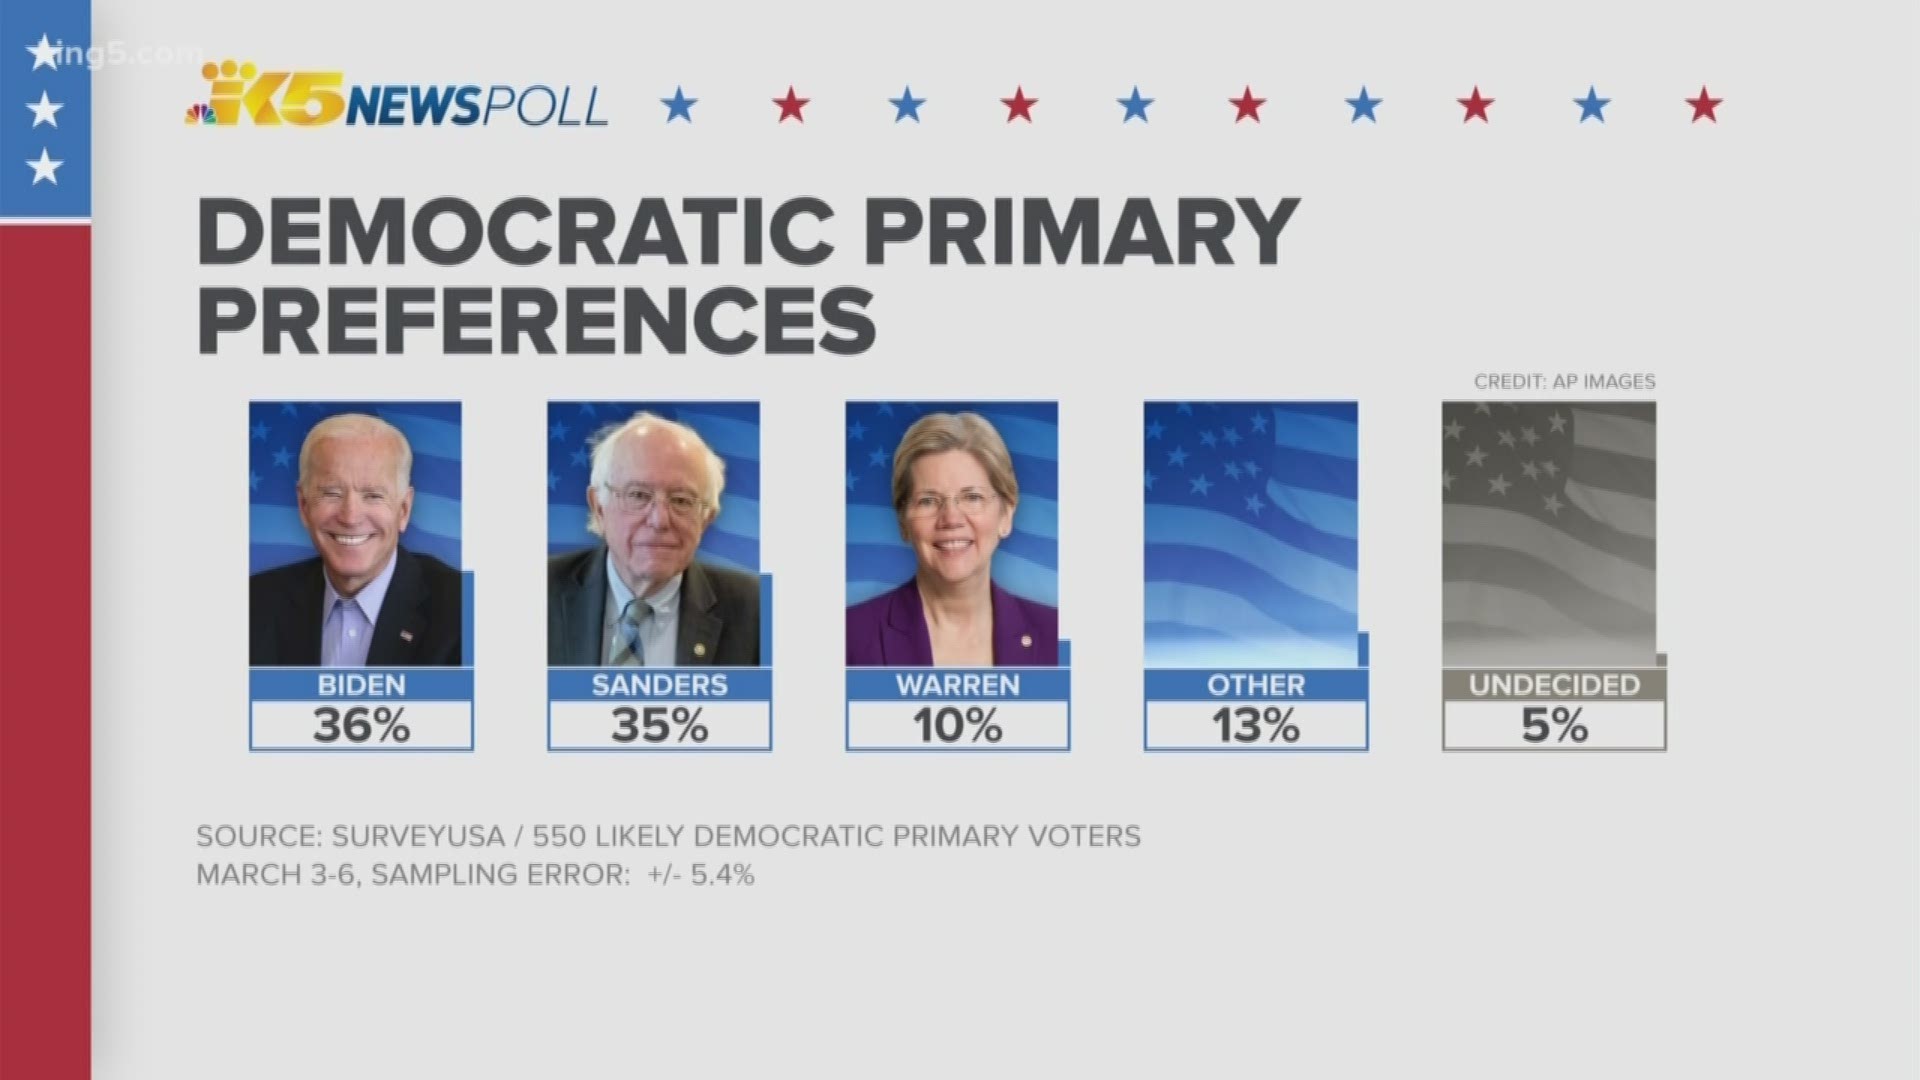 An exclusive KING 5 News poll shows Joe Biden and Bernie Sanders have nearly the same amount of support among Democratic voters.